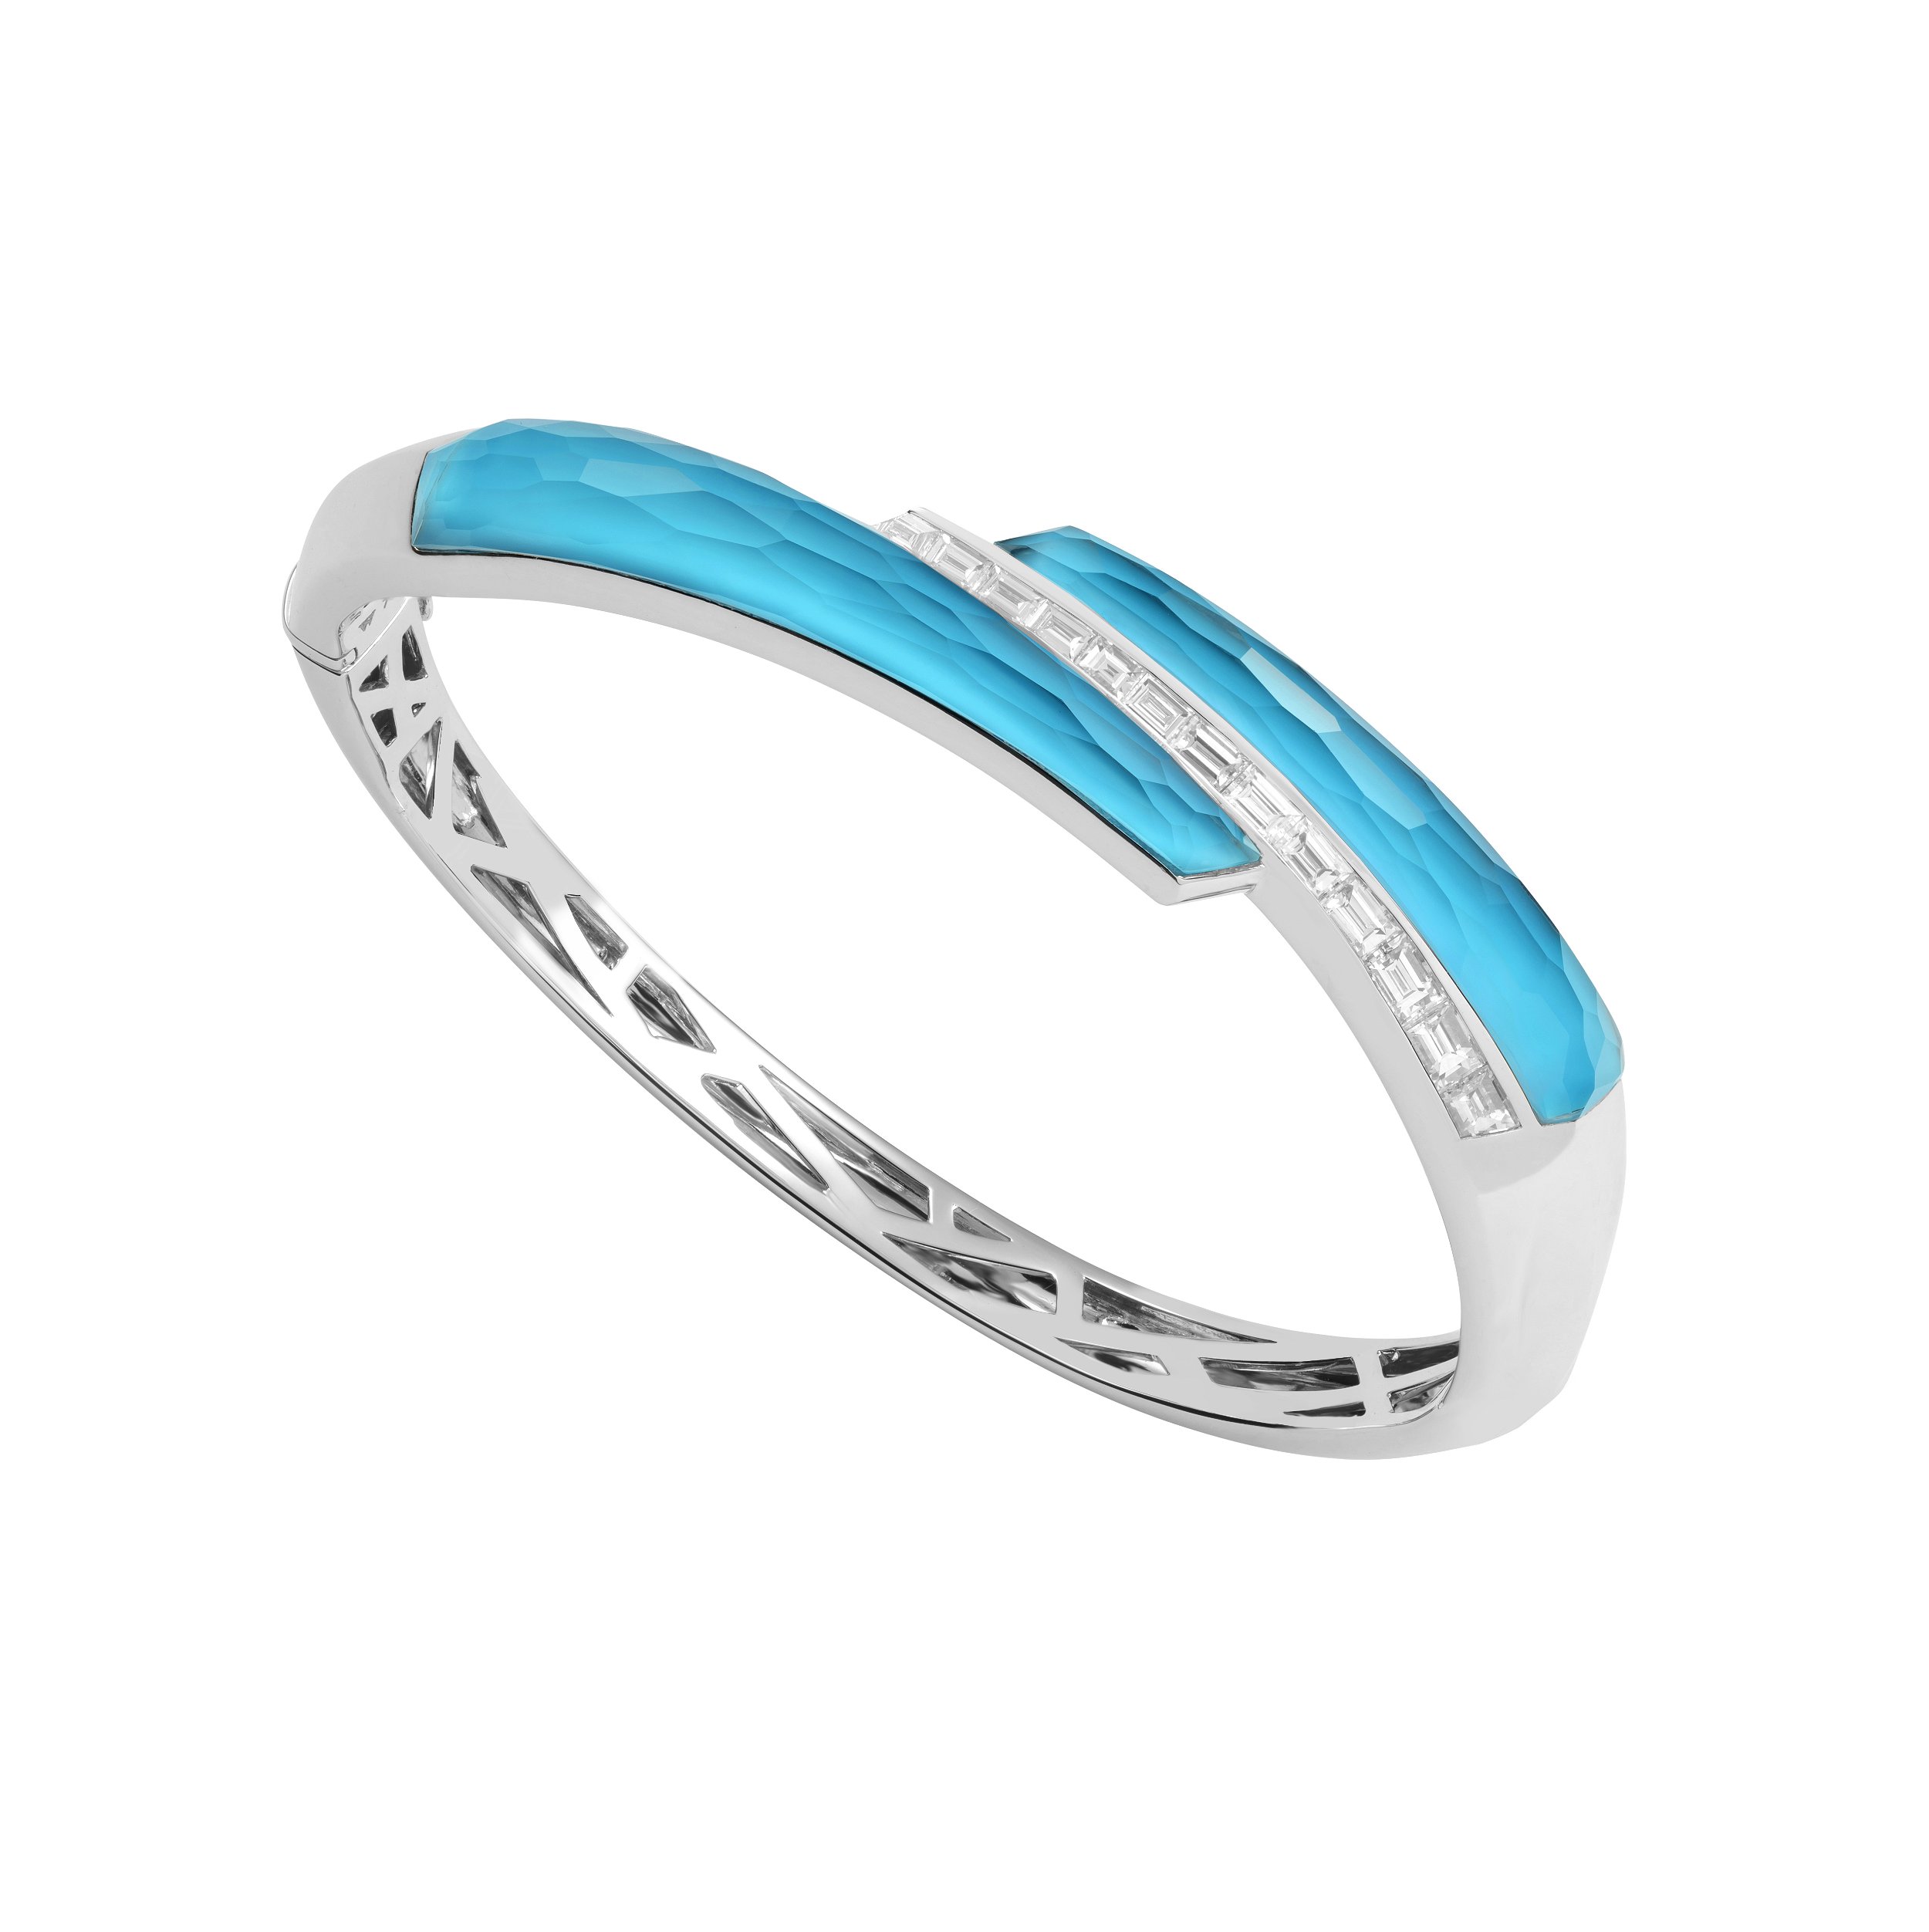 CH2 Shard Bangle Bracelet with Turquoise Crystal Haze and White Diamonds in 18kt White Gold